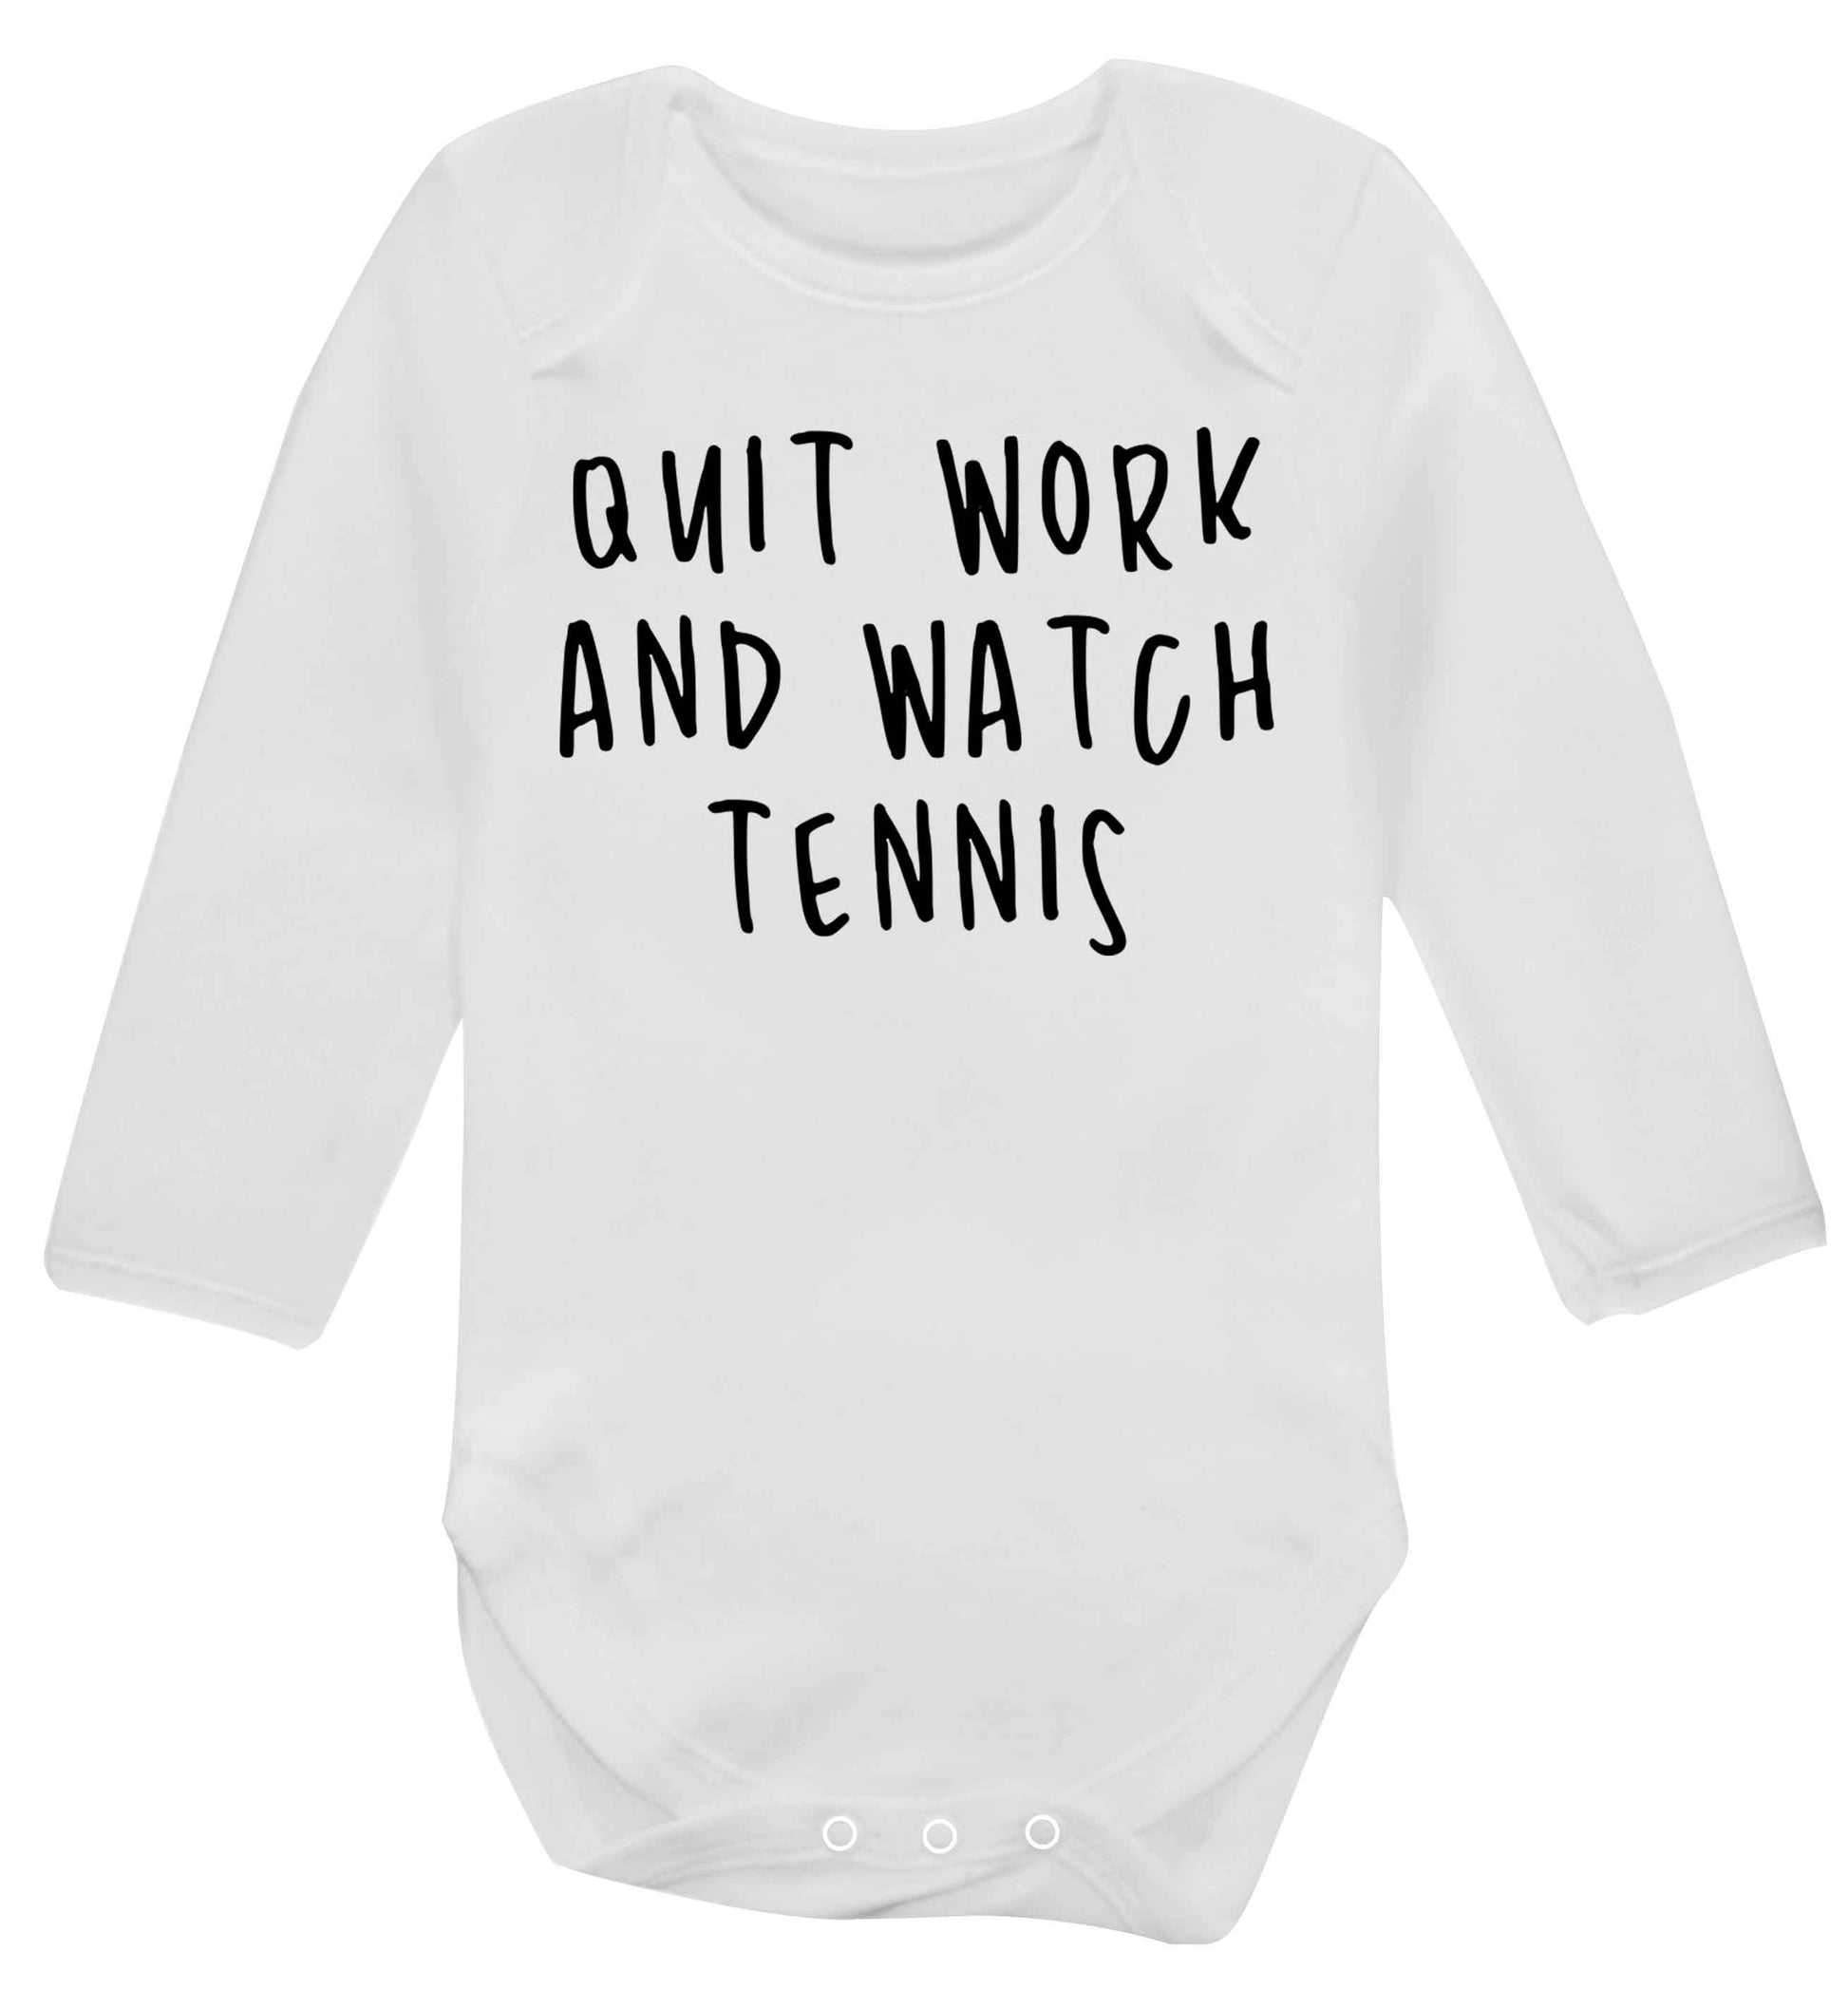 Quit work and watch tennis Baby Vest long sleeved white 6-12 months